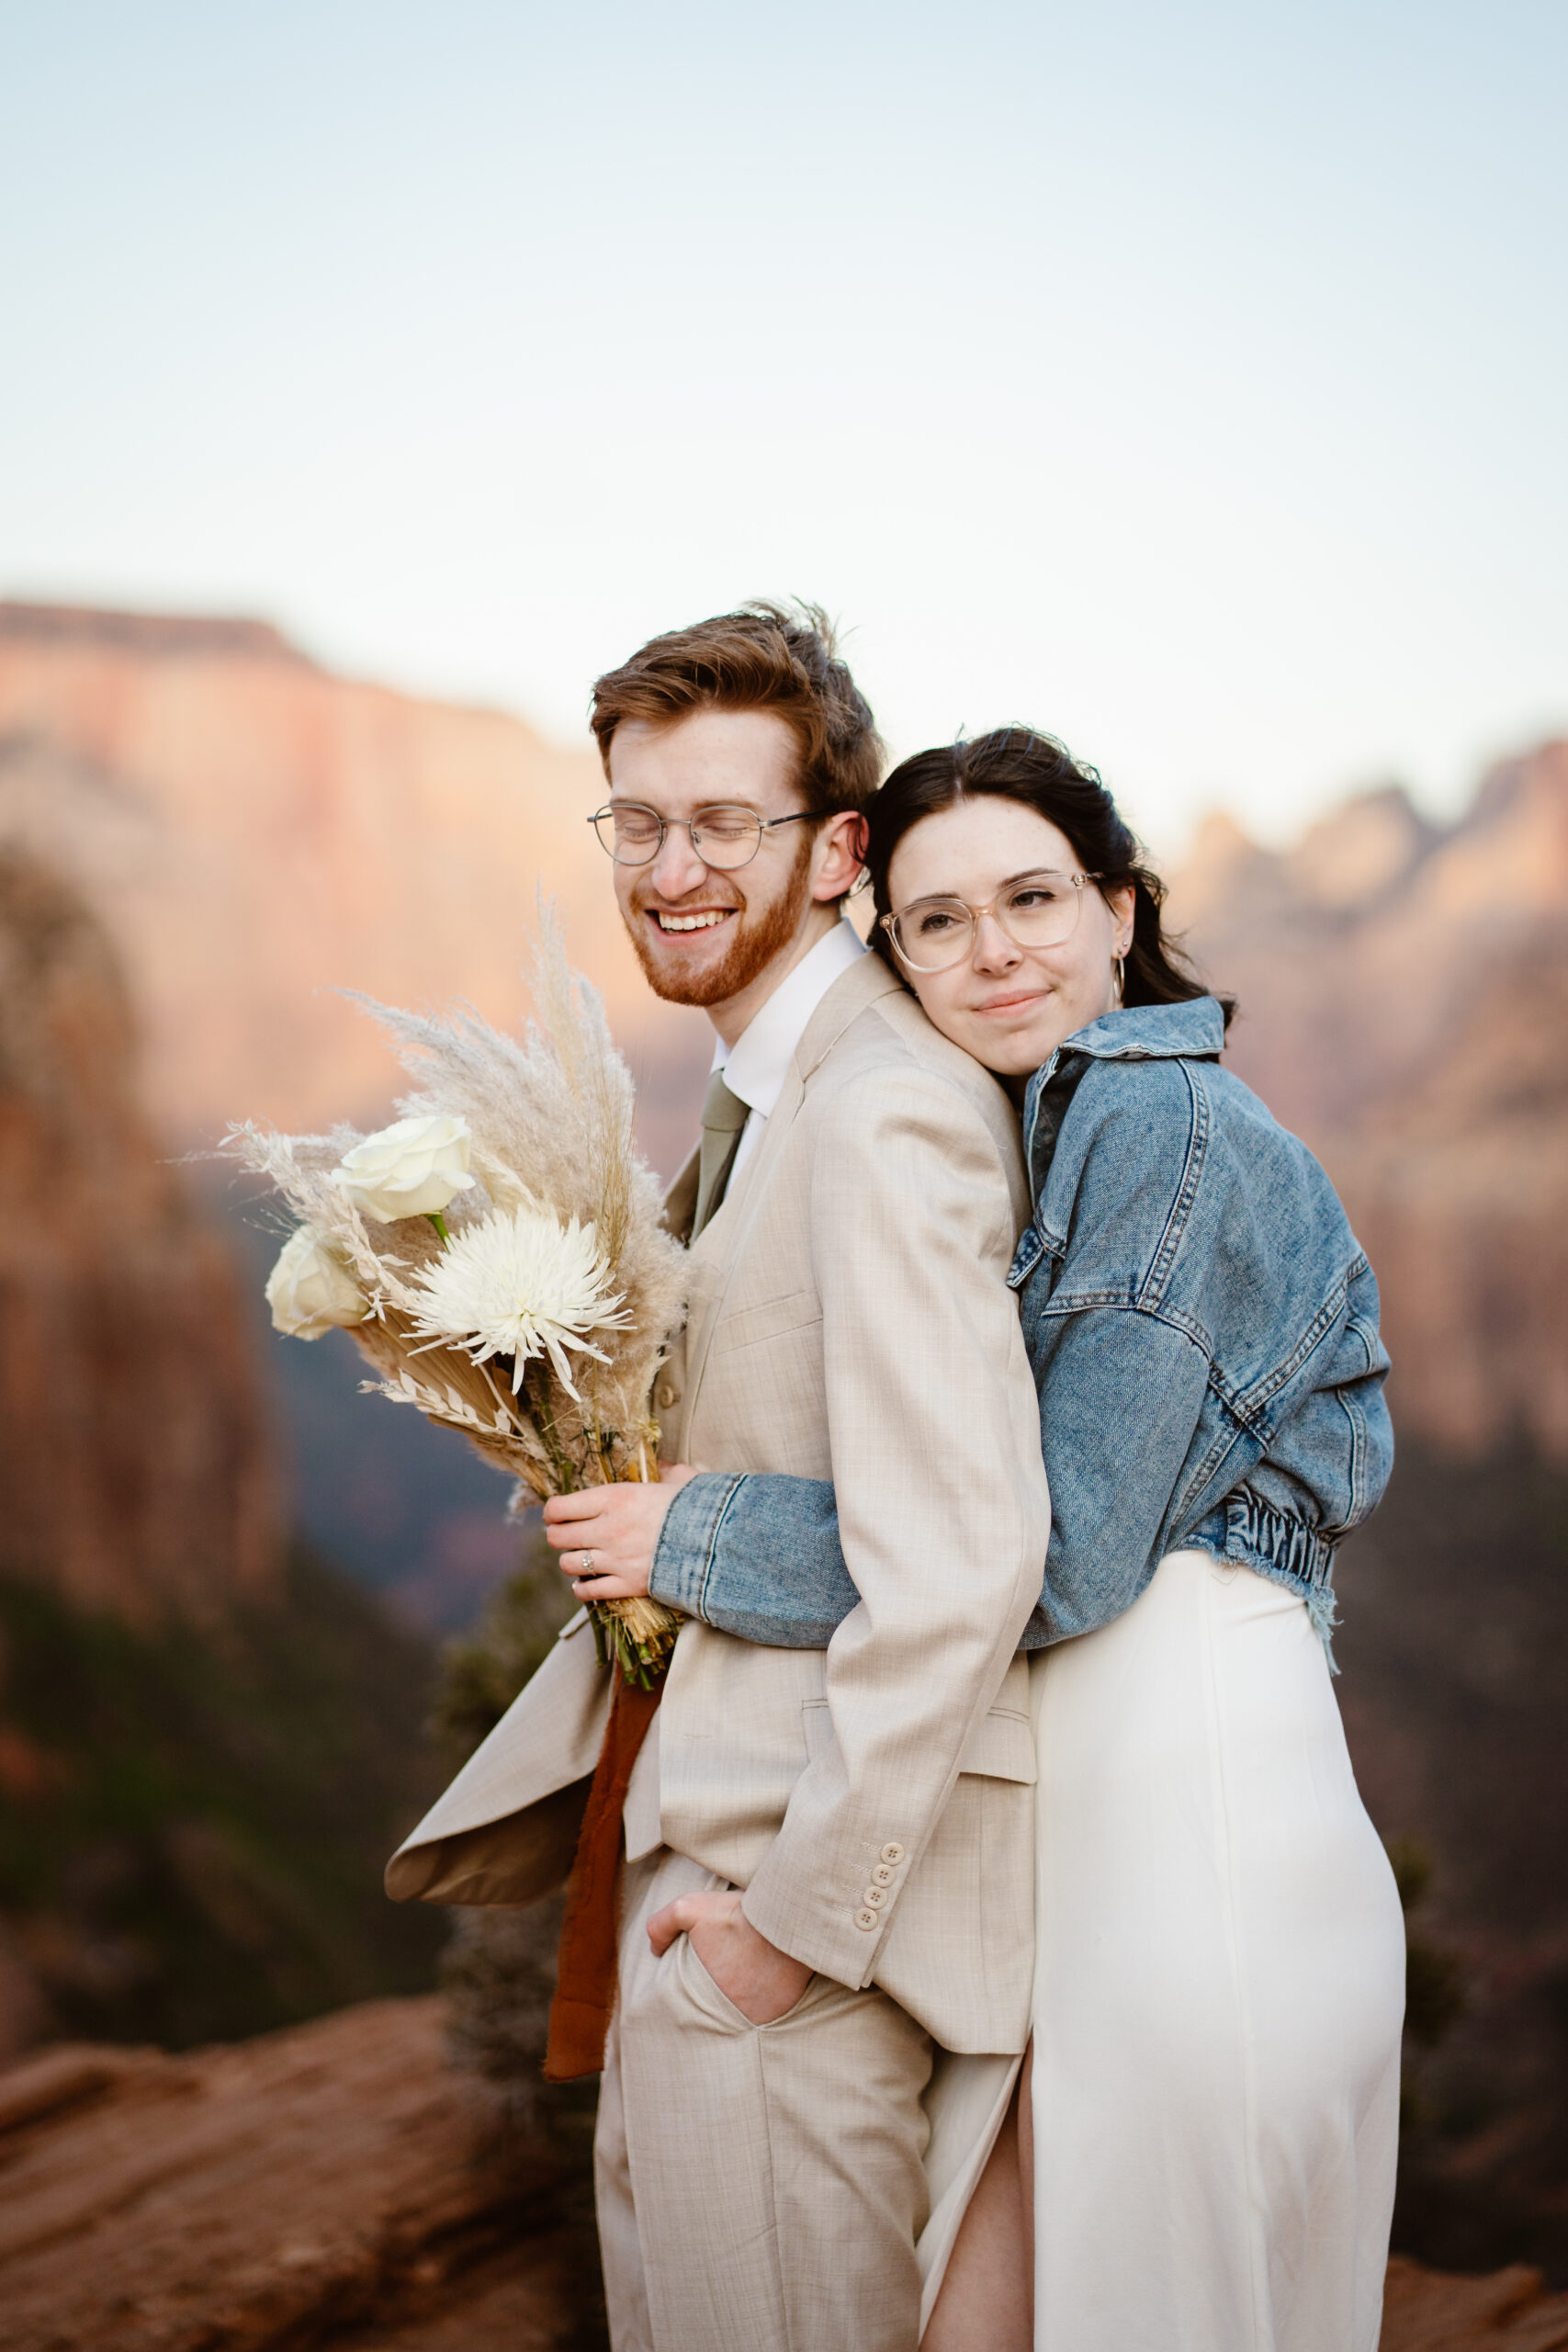 A couple shares an embrace in front of overlook background during their elopement.